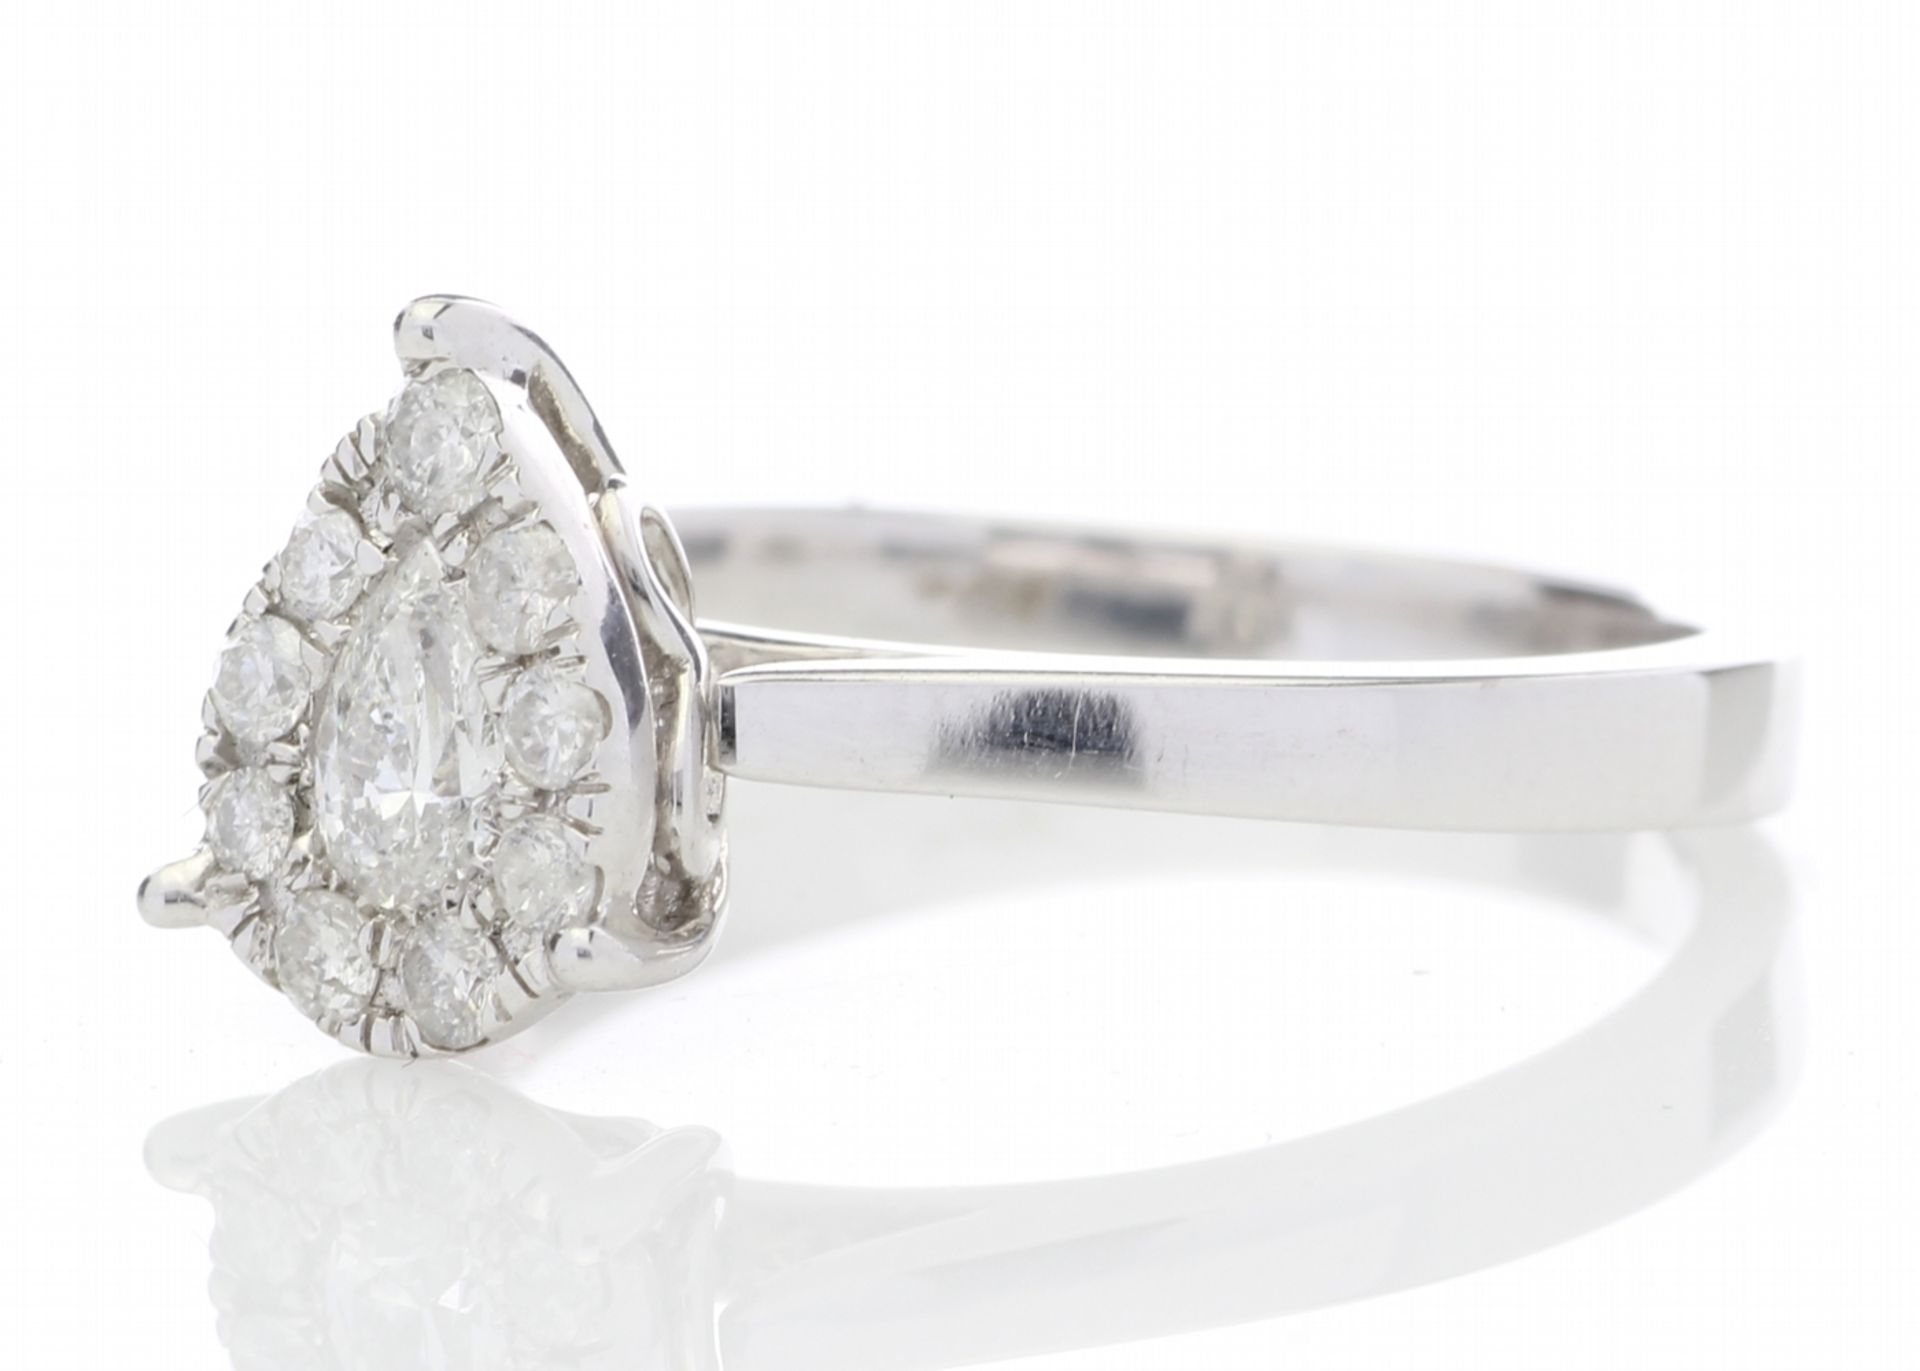 18ct White Gold Semi Eternity Baguette Cut Diamond Ring 1.08 Carats - Valued By IDI £14,870.00 - - Image 2 of 5